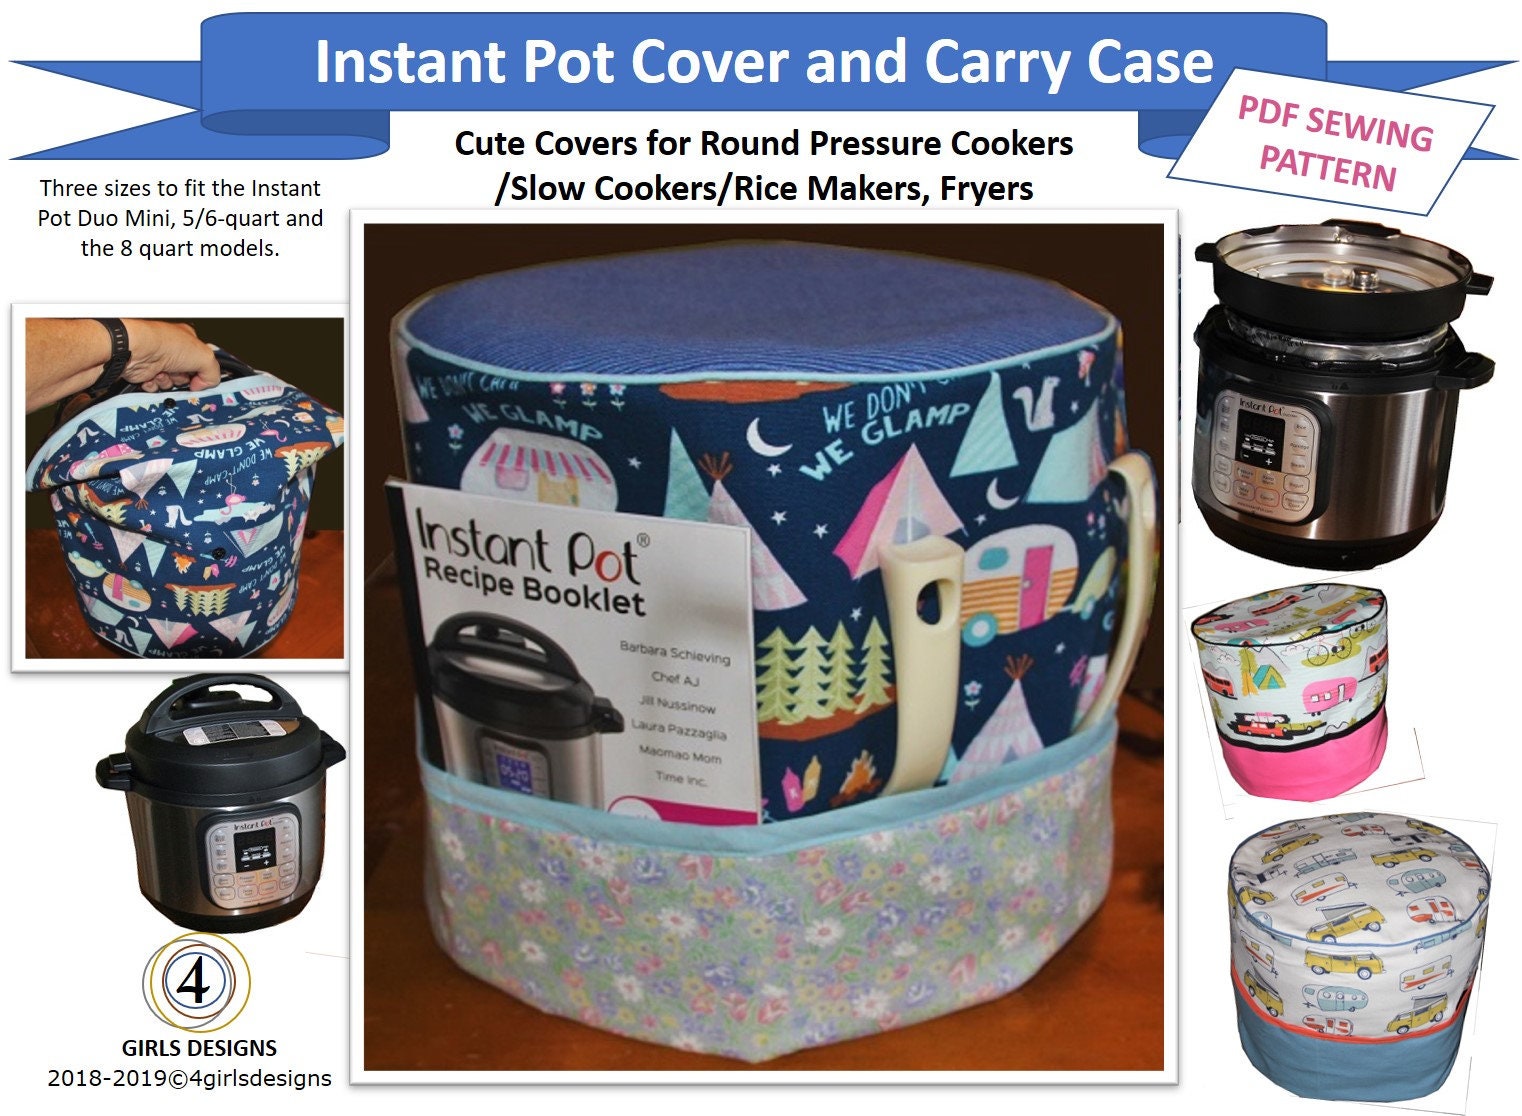 NEW Instant Pot Pressure Cooker Cover and Carry Case PDF Sewing